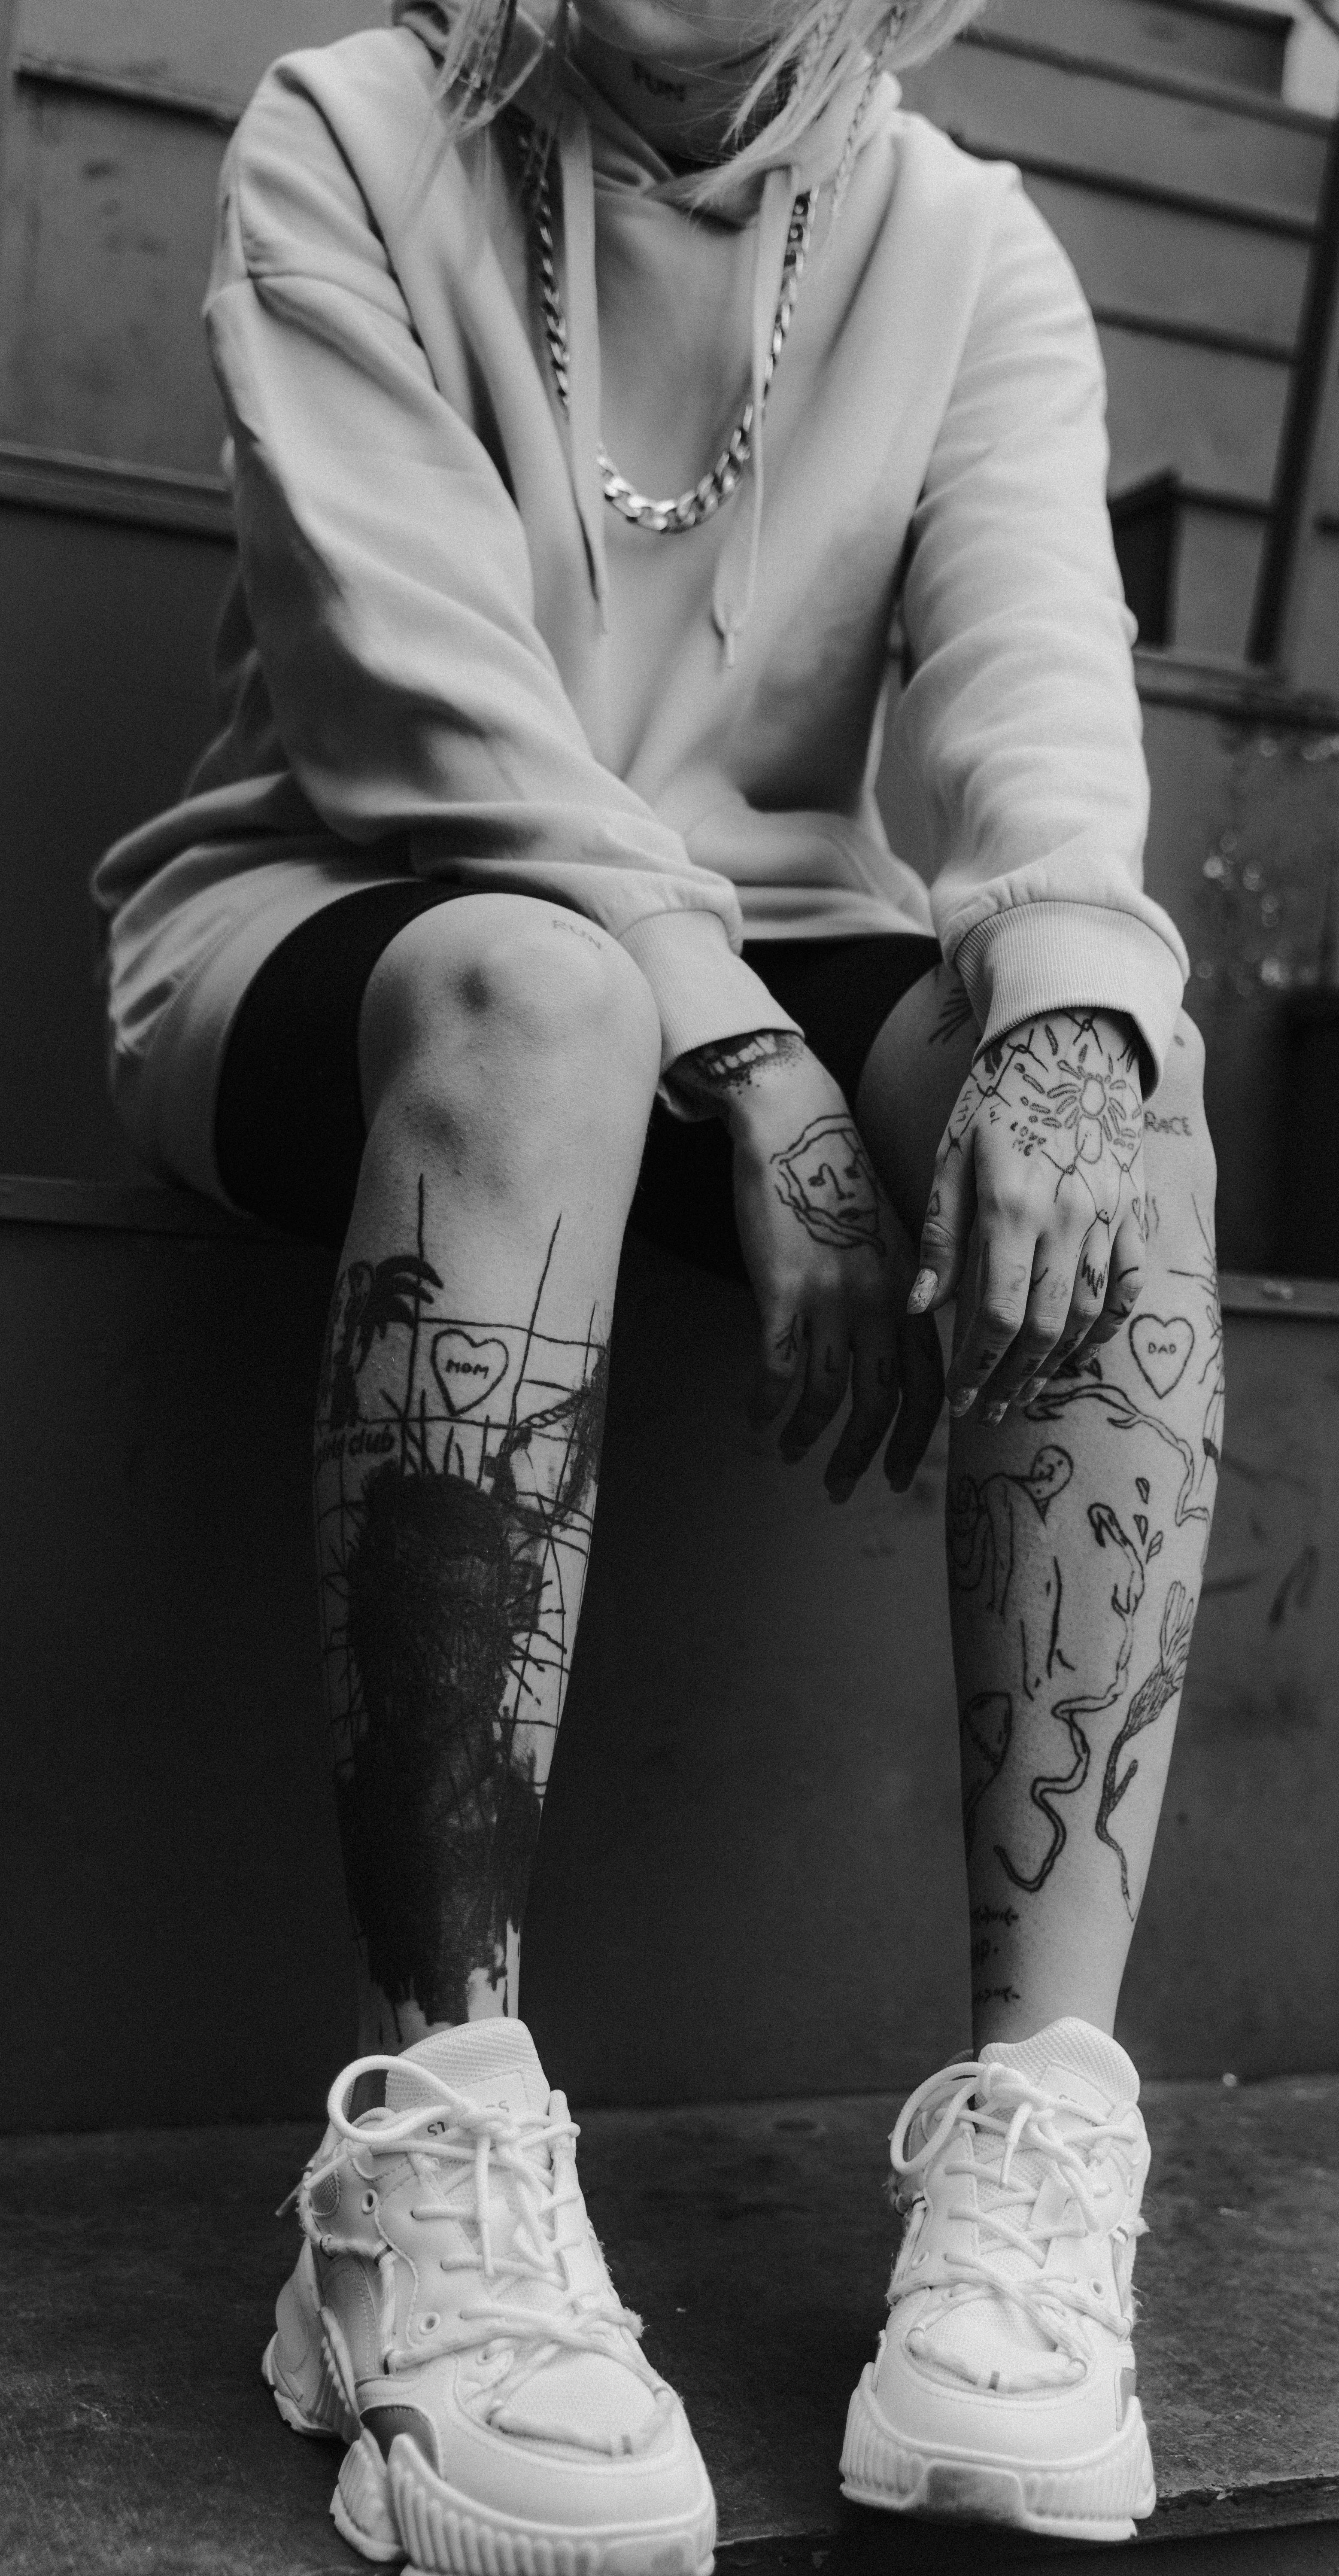 98 Calf Tattoo Ideas As Cool As They Are Unique | Bored Panda